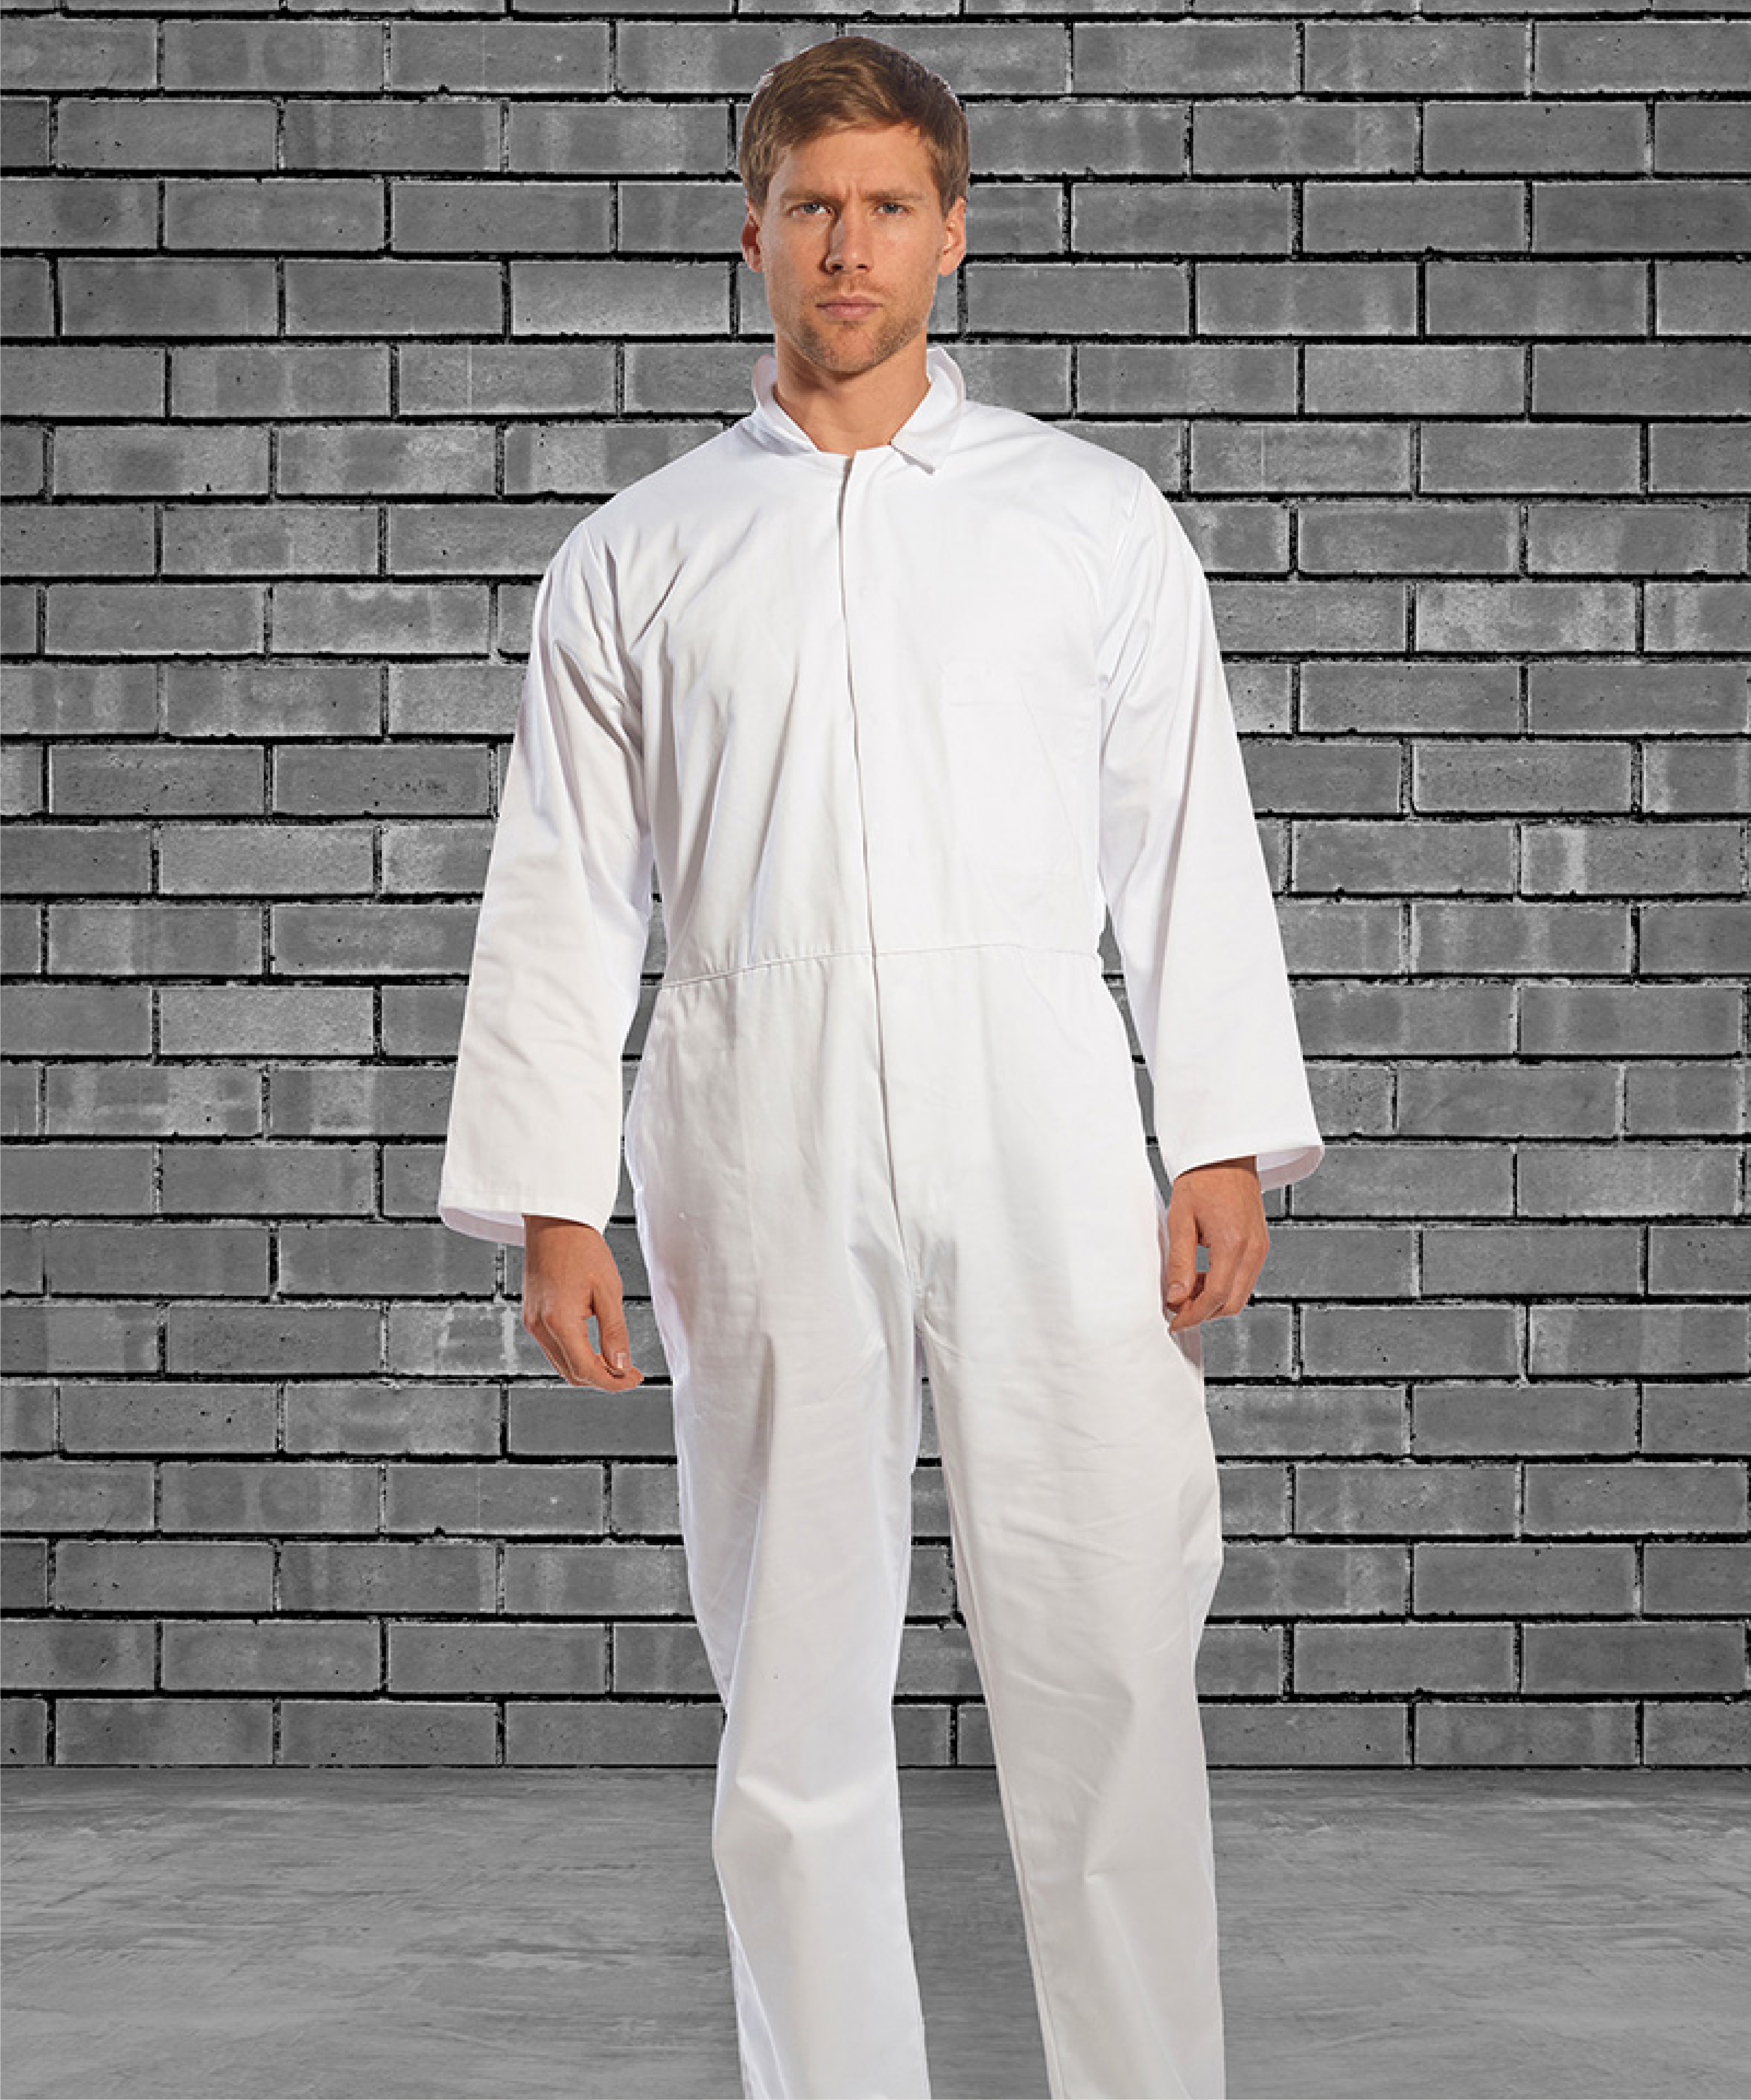 Fleet Factors - Coveralls - PPE, Workwear & Embroidery